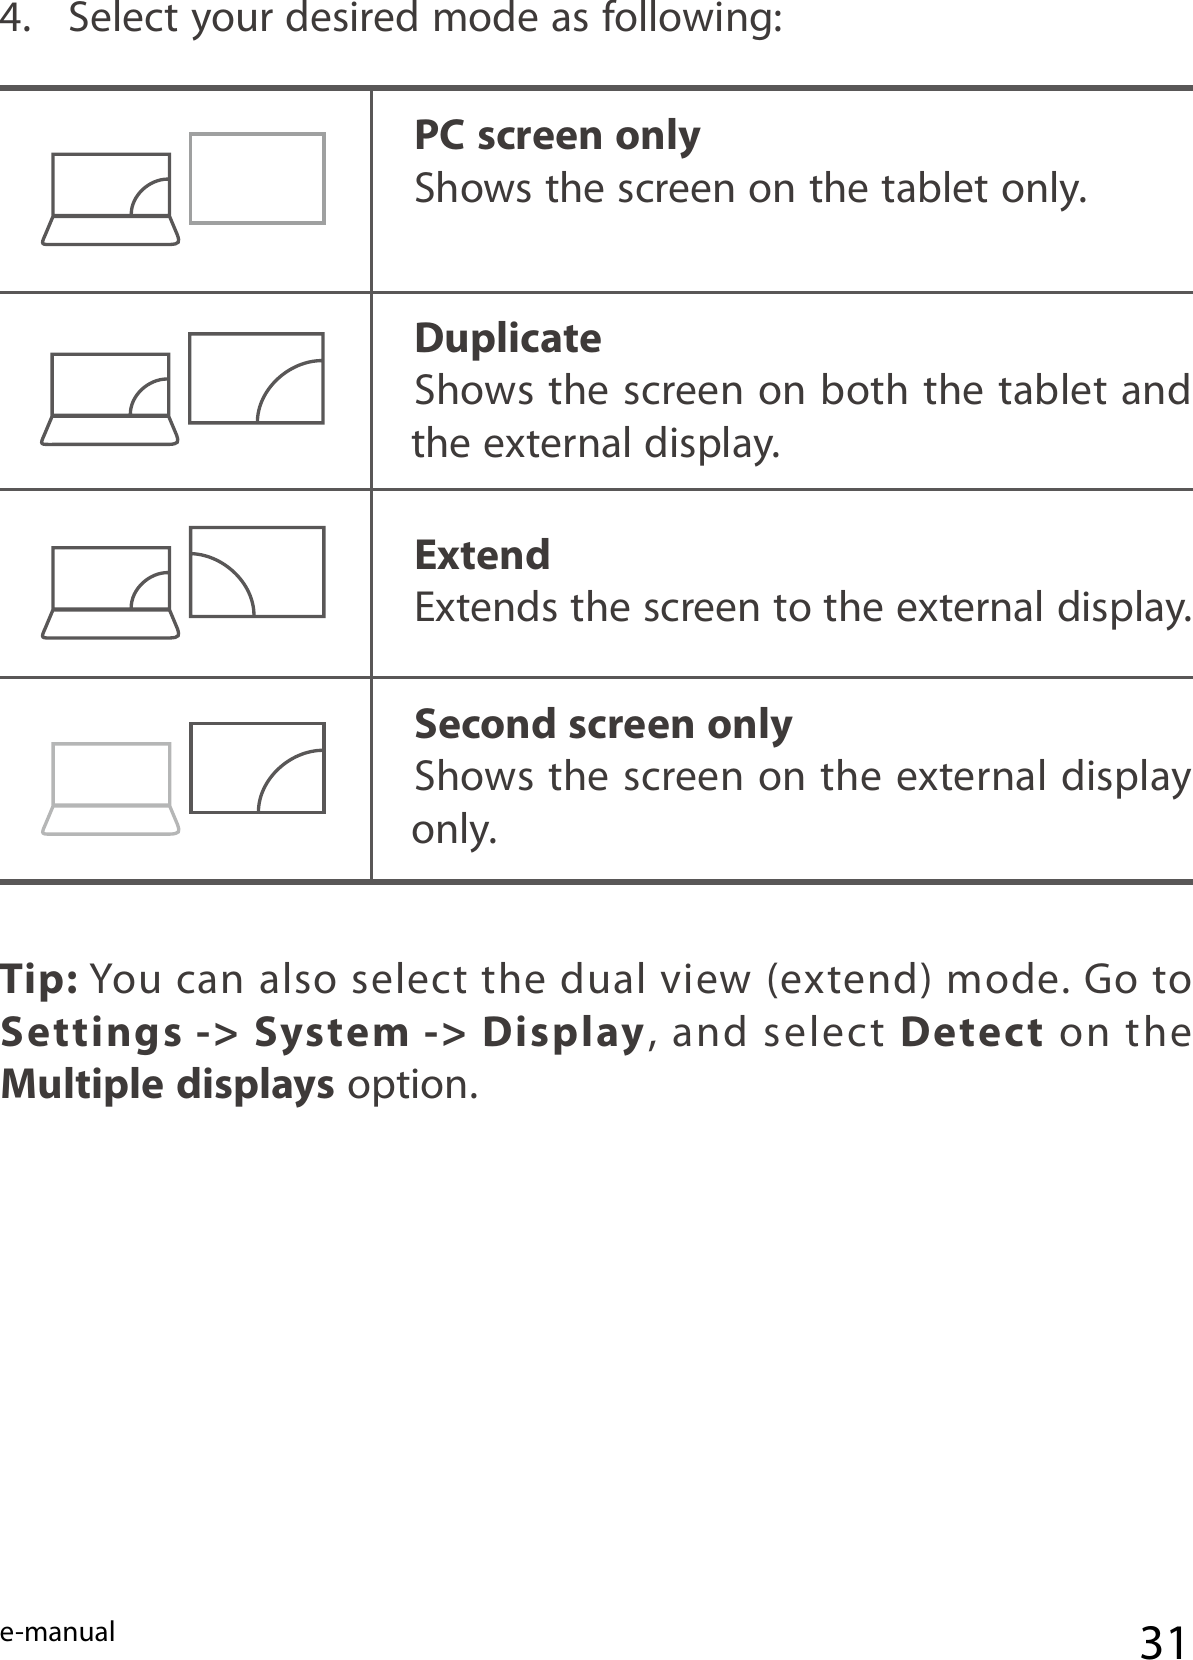 e-manual 314.  Select your desired mode as following: PC screen onlyShows the screen on the tablet only.DuplicateShows the screen on both the tablet and the external display.Second screen onlyShows the screen on the external display only.ExtendExtends the screen to the external display.Tip: You can also select the  dual view (extend) mode. Go to Settings -&gt; System -&gt; Display, and select Detect on the Multiple displays option.